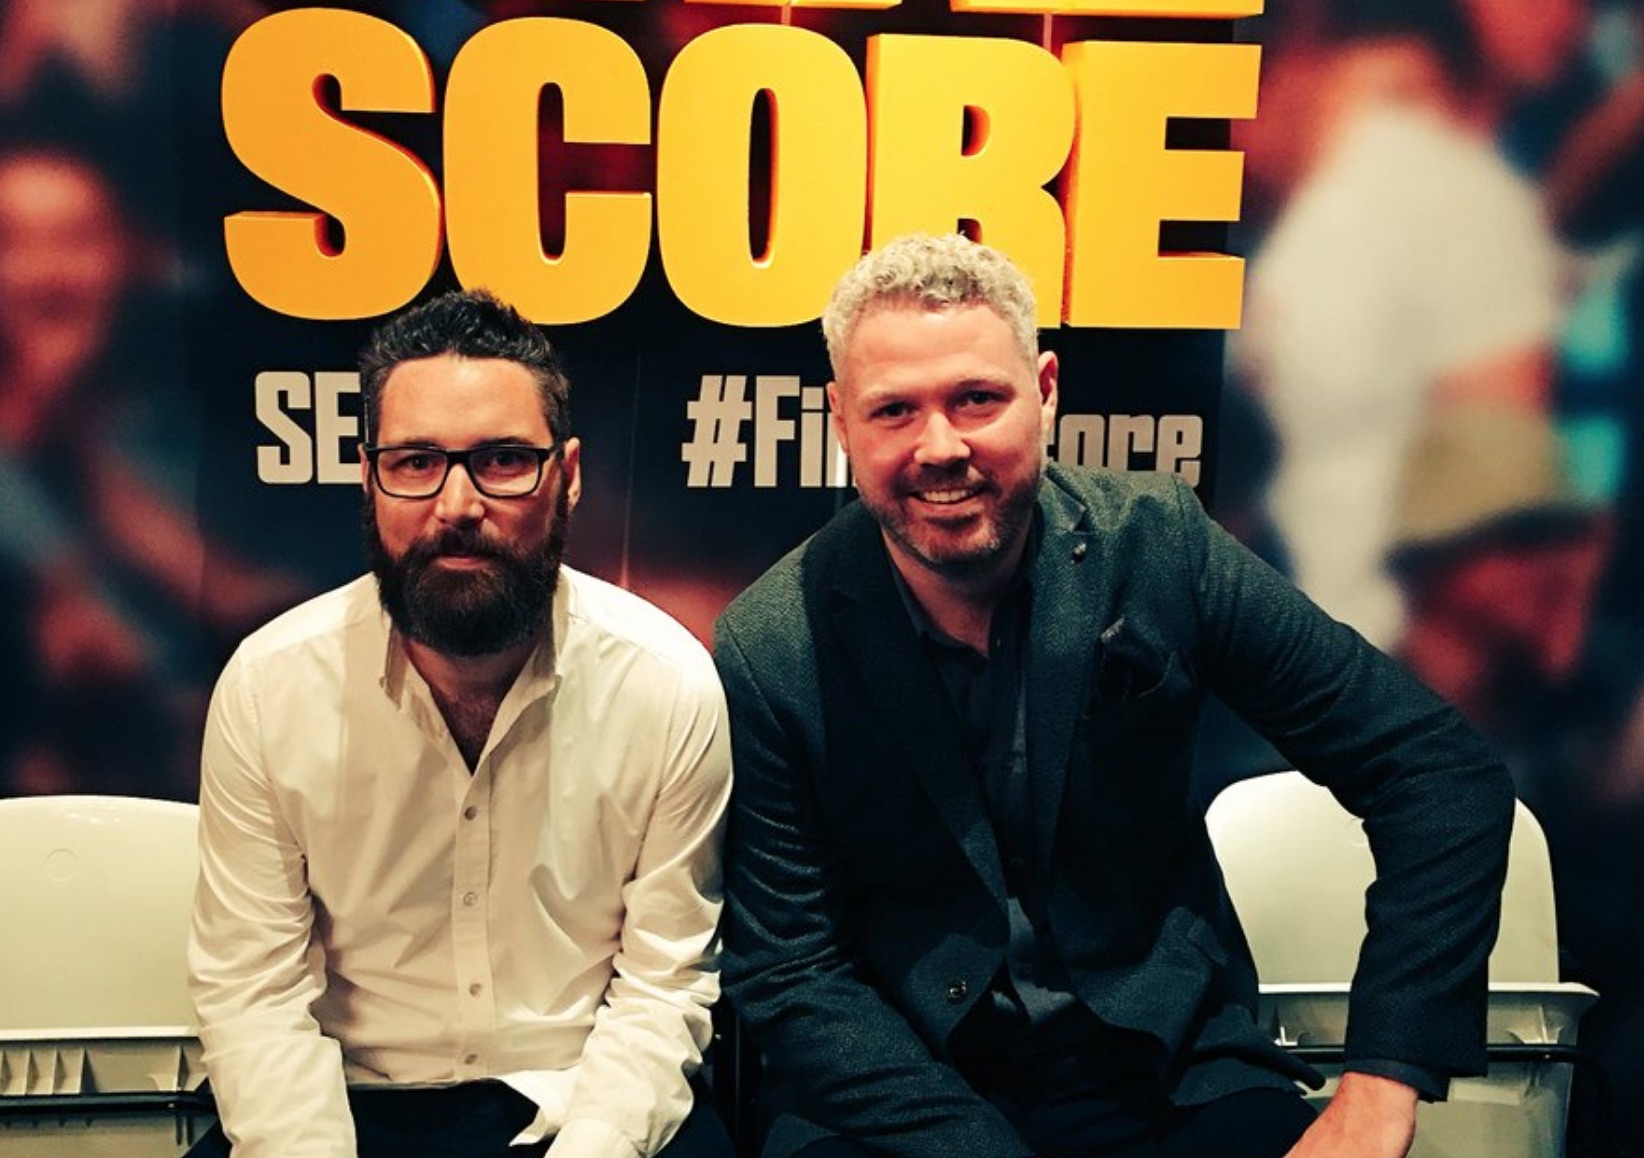 Keith (left) and David at the Final Score premiere